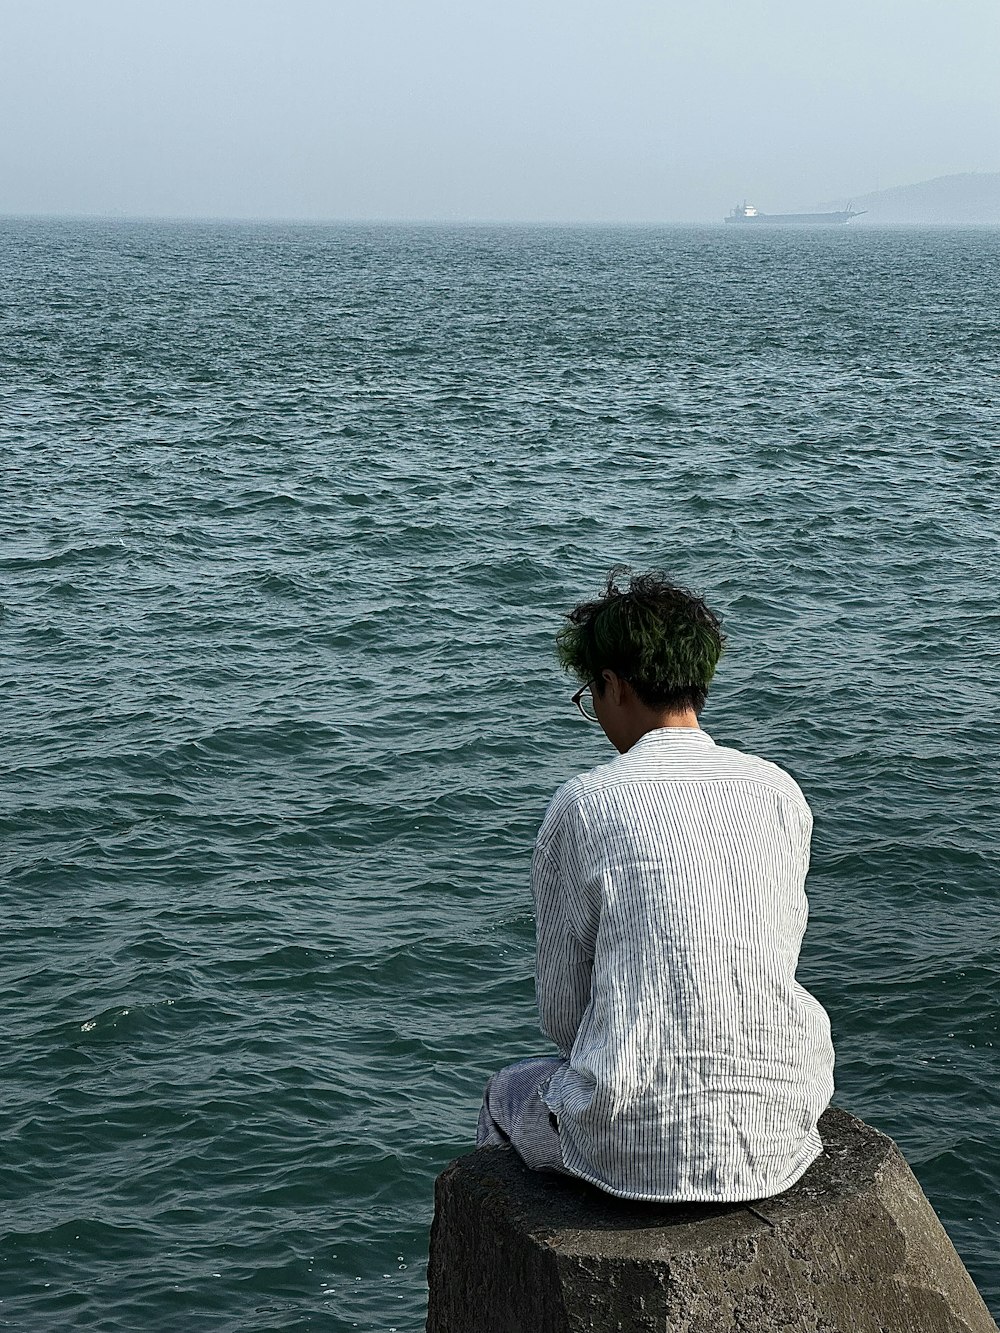 a person sitting on a rock looking out at the ocean